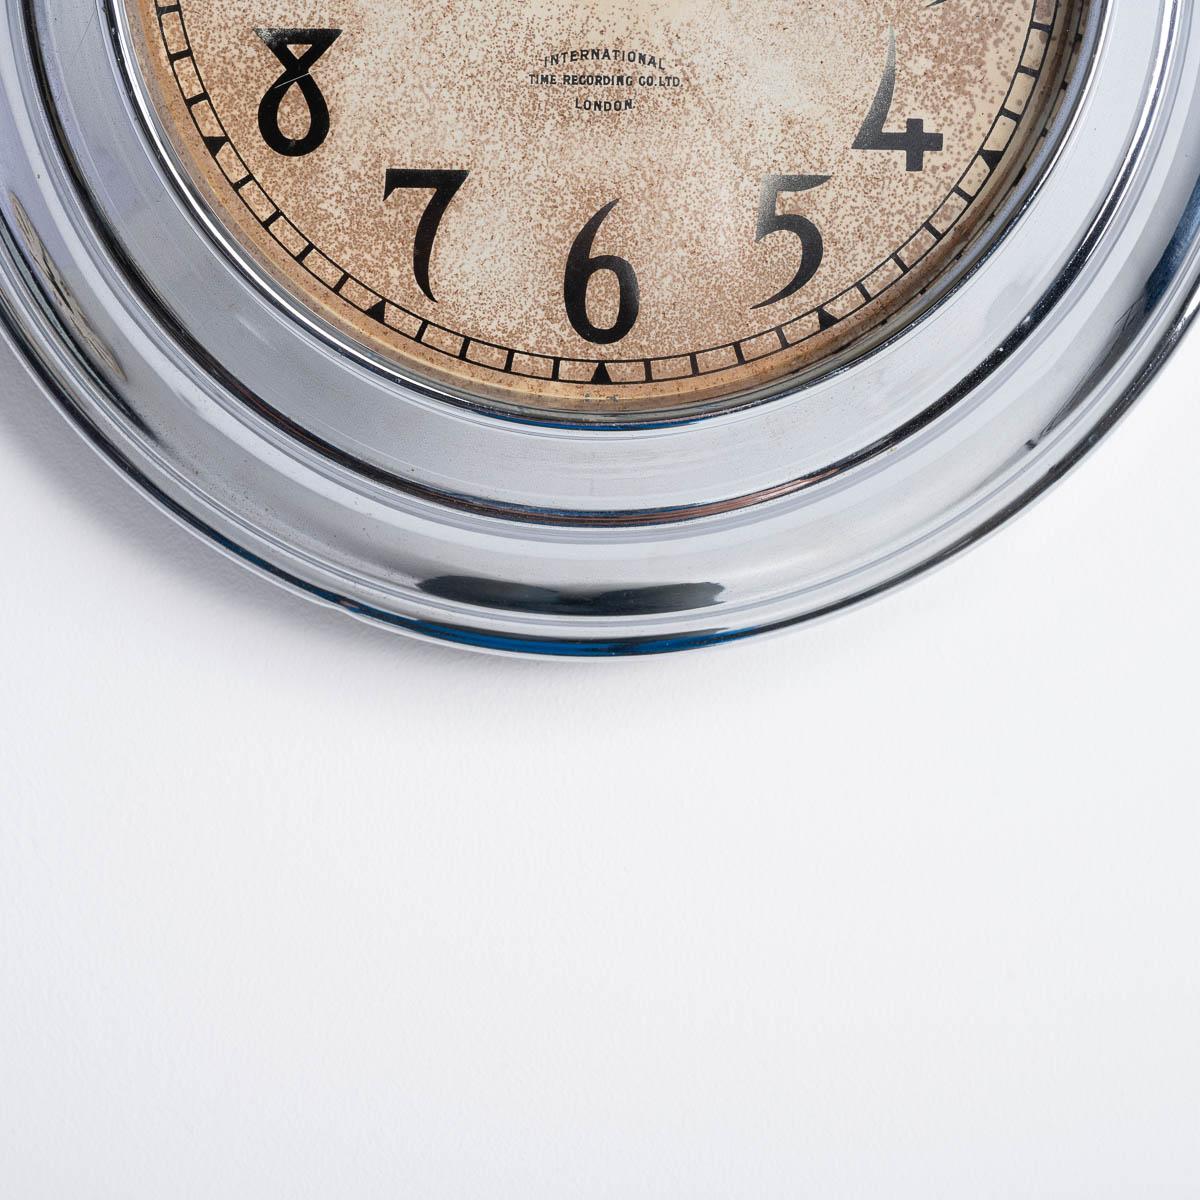 Spun Reclaimed Small Chrome Wall Clock by 'ITR' International Time Recording Co Ltd For Sale